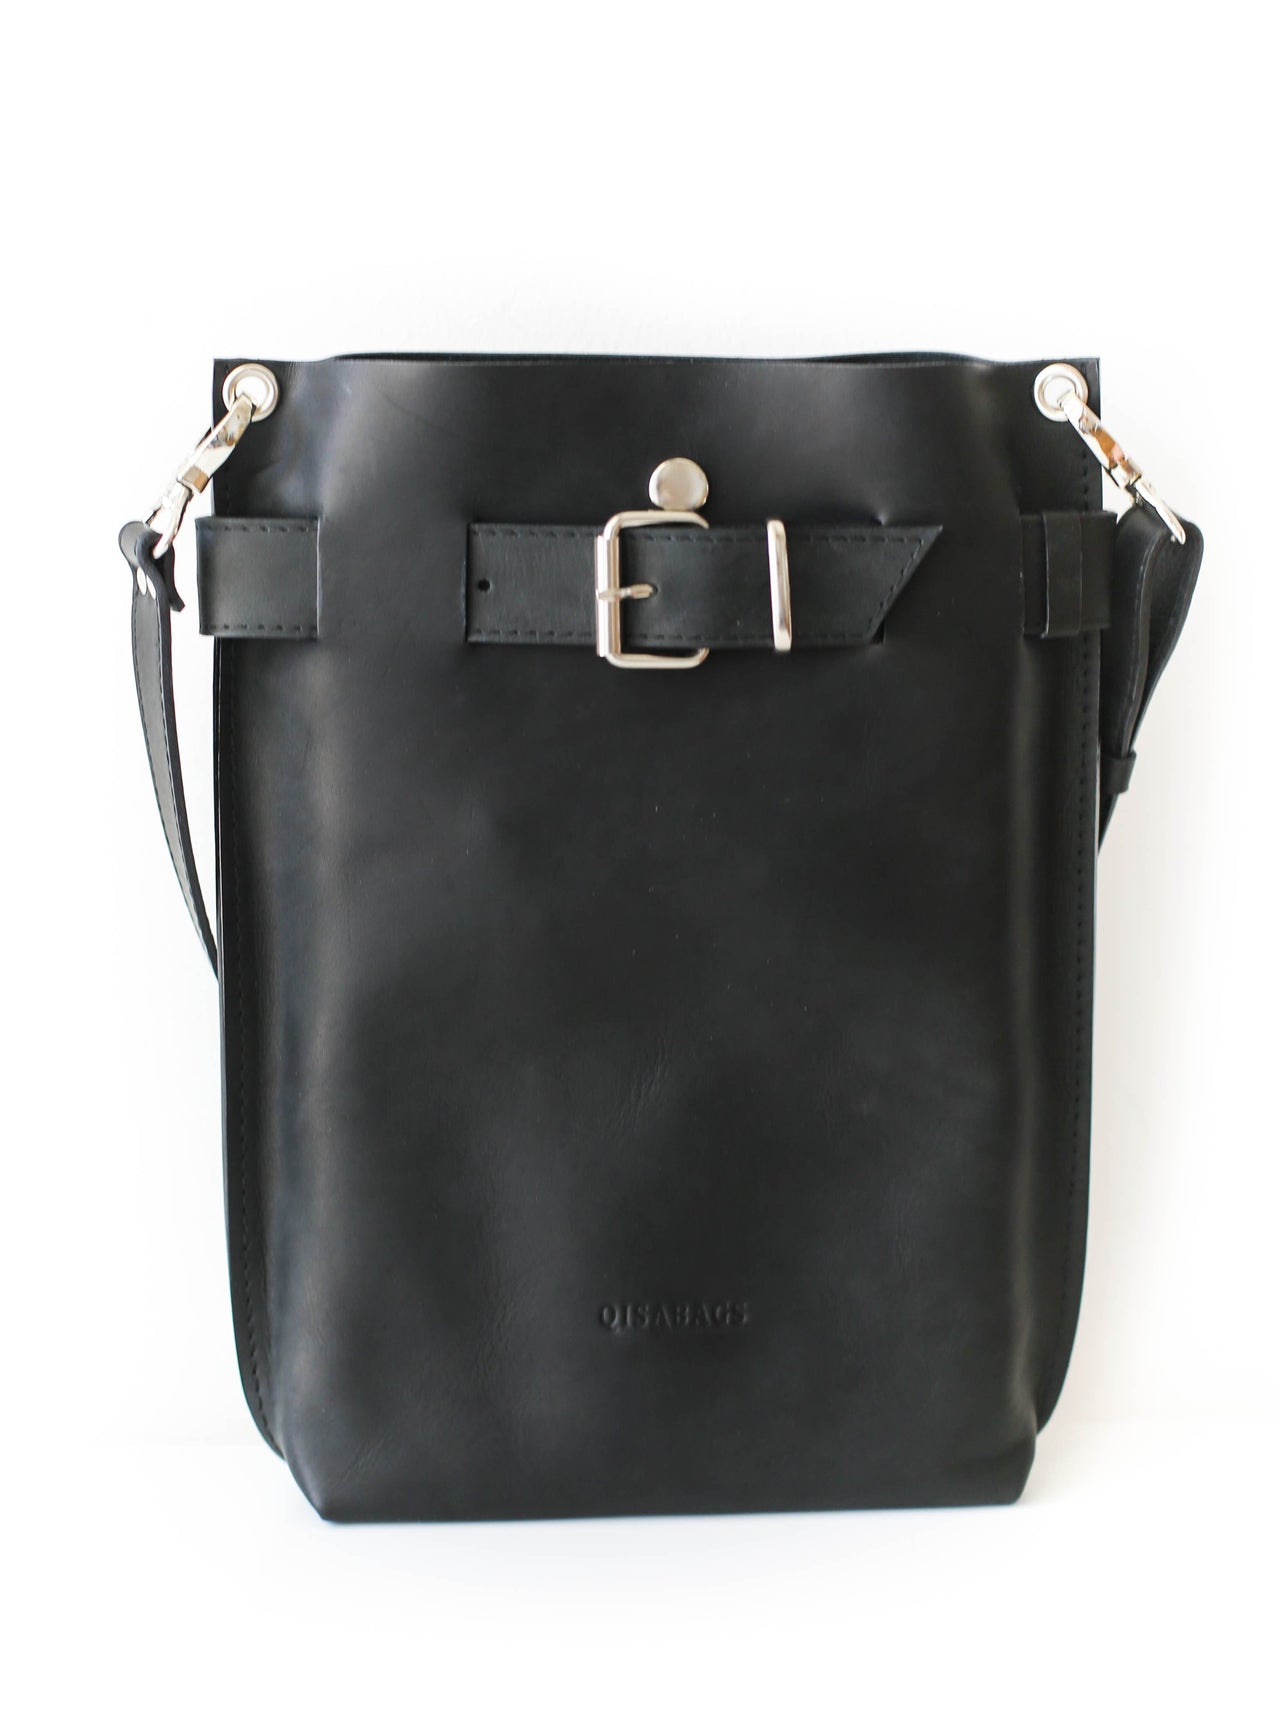 black leather purse with silver hardware